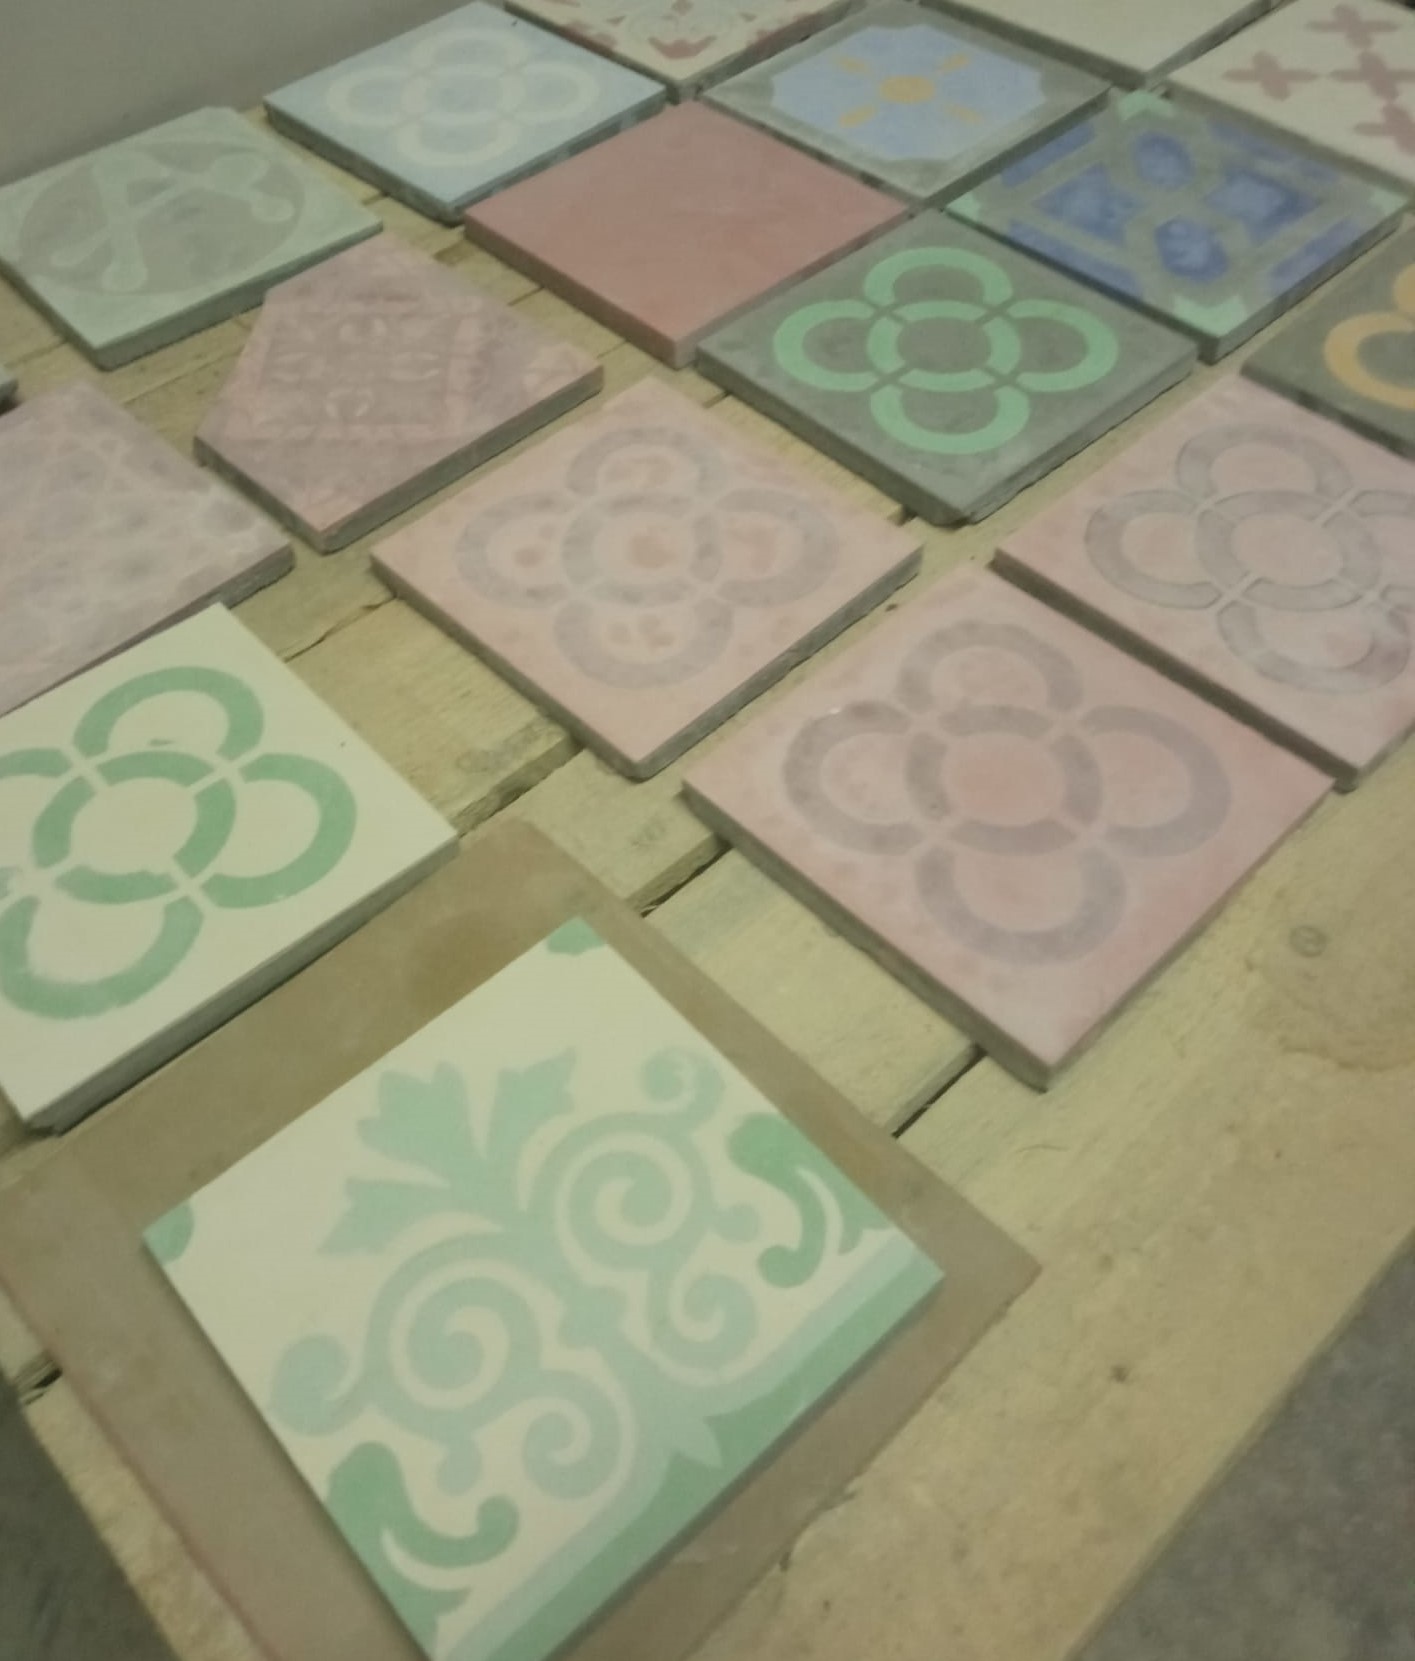 You can make your own tiles